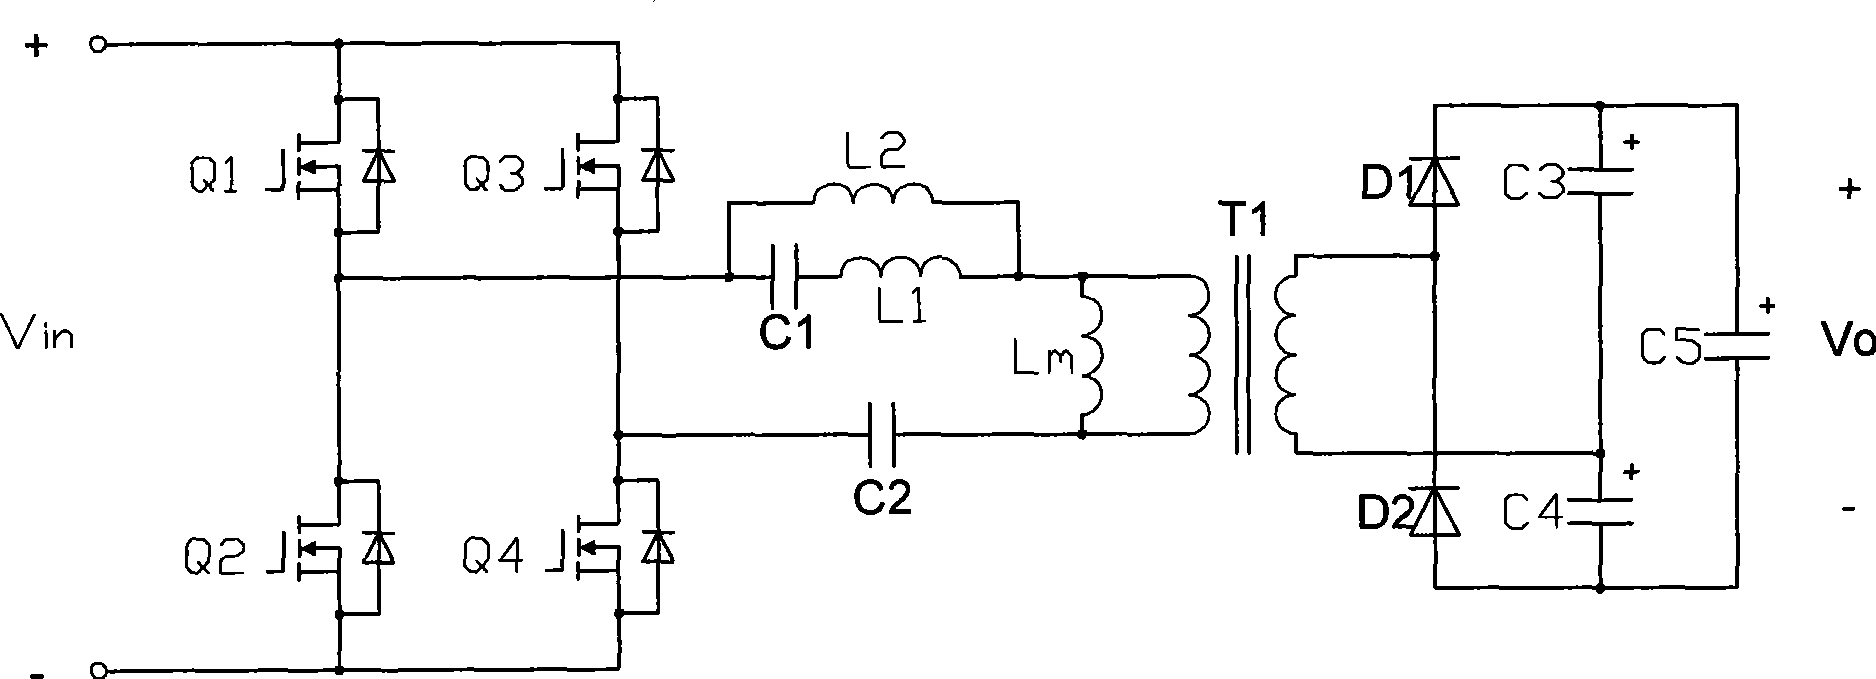 Voltage multiplying synchronous rectifying multi-resonance soft switching converter